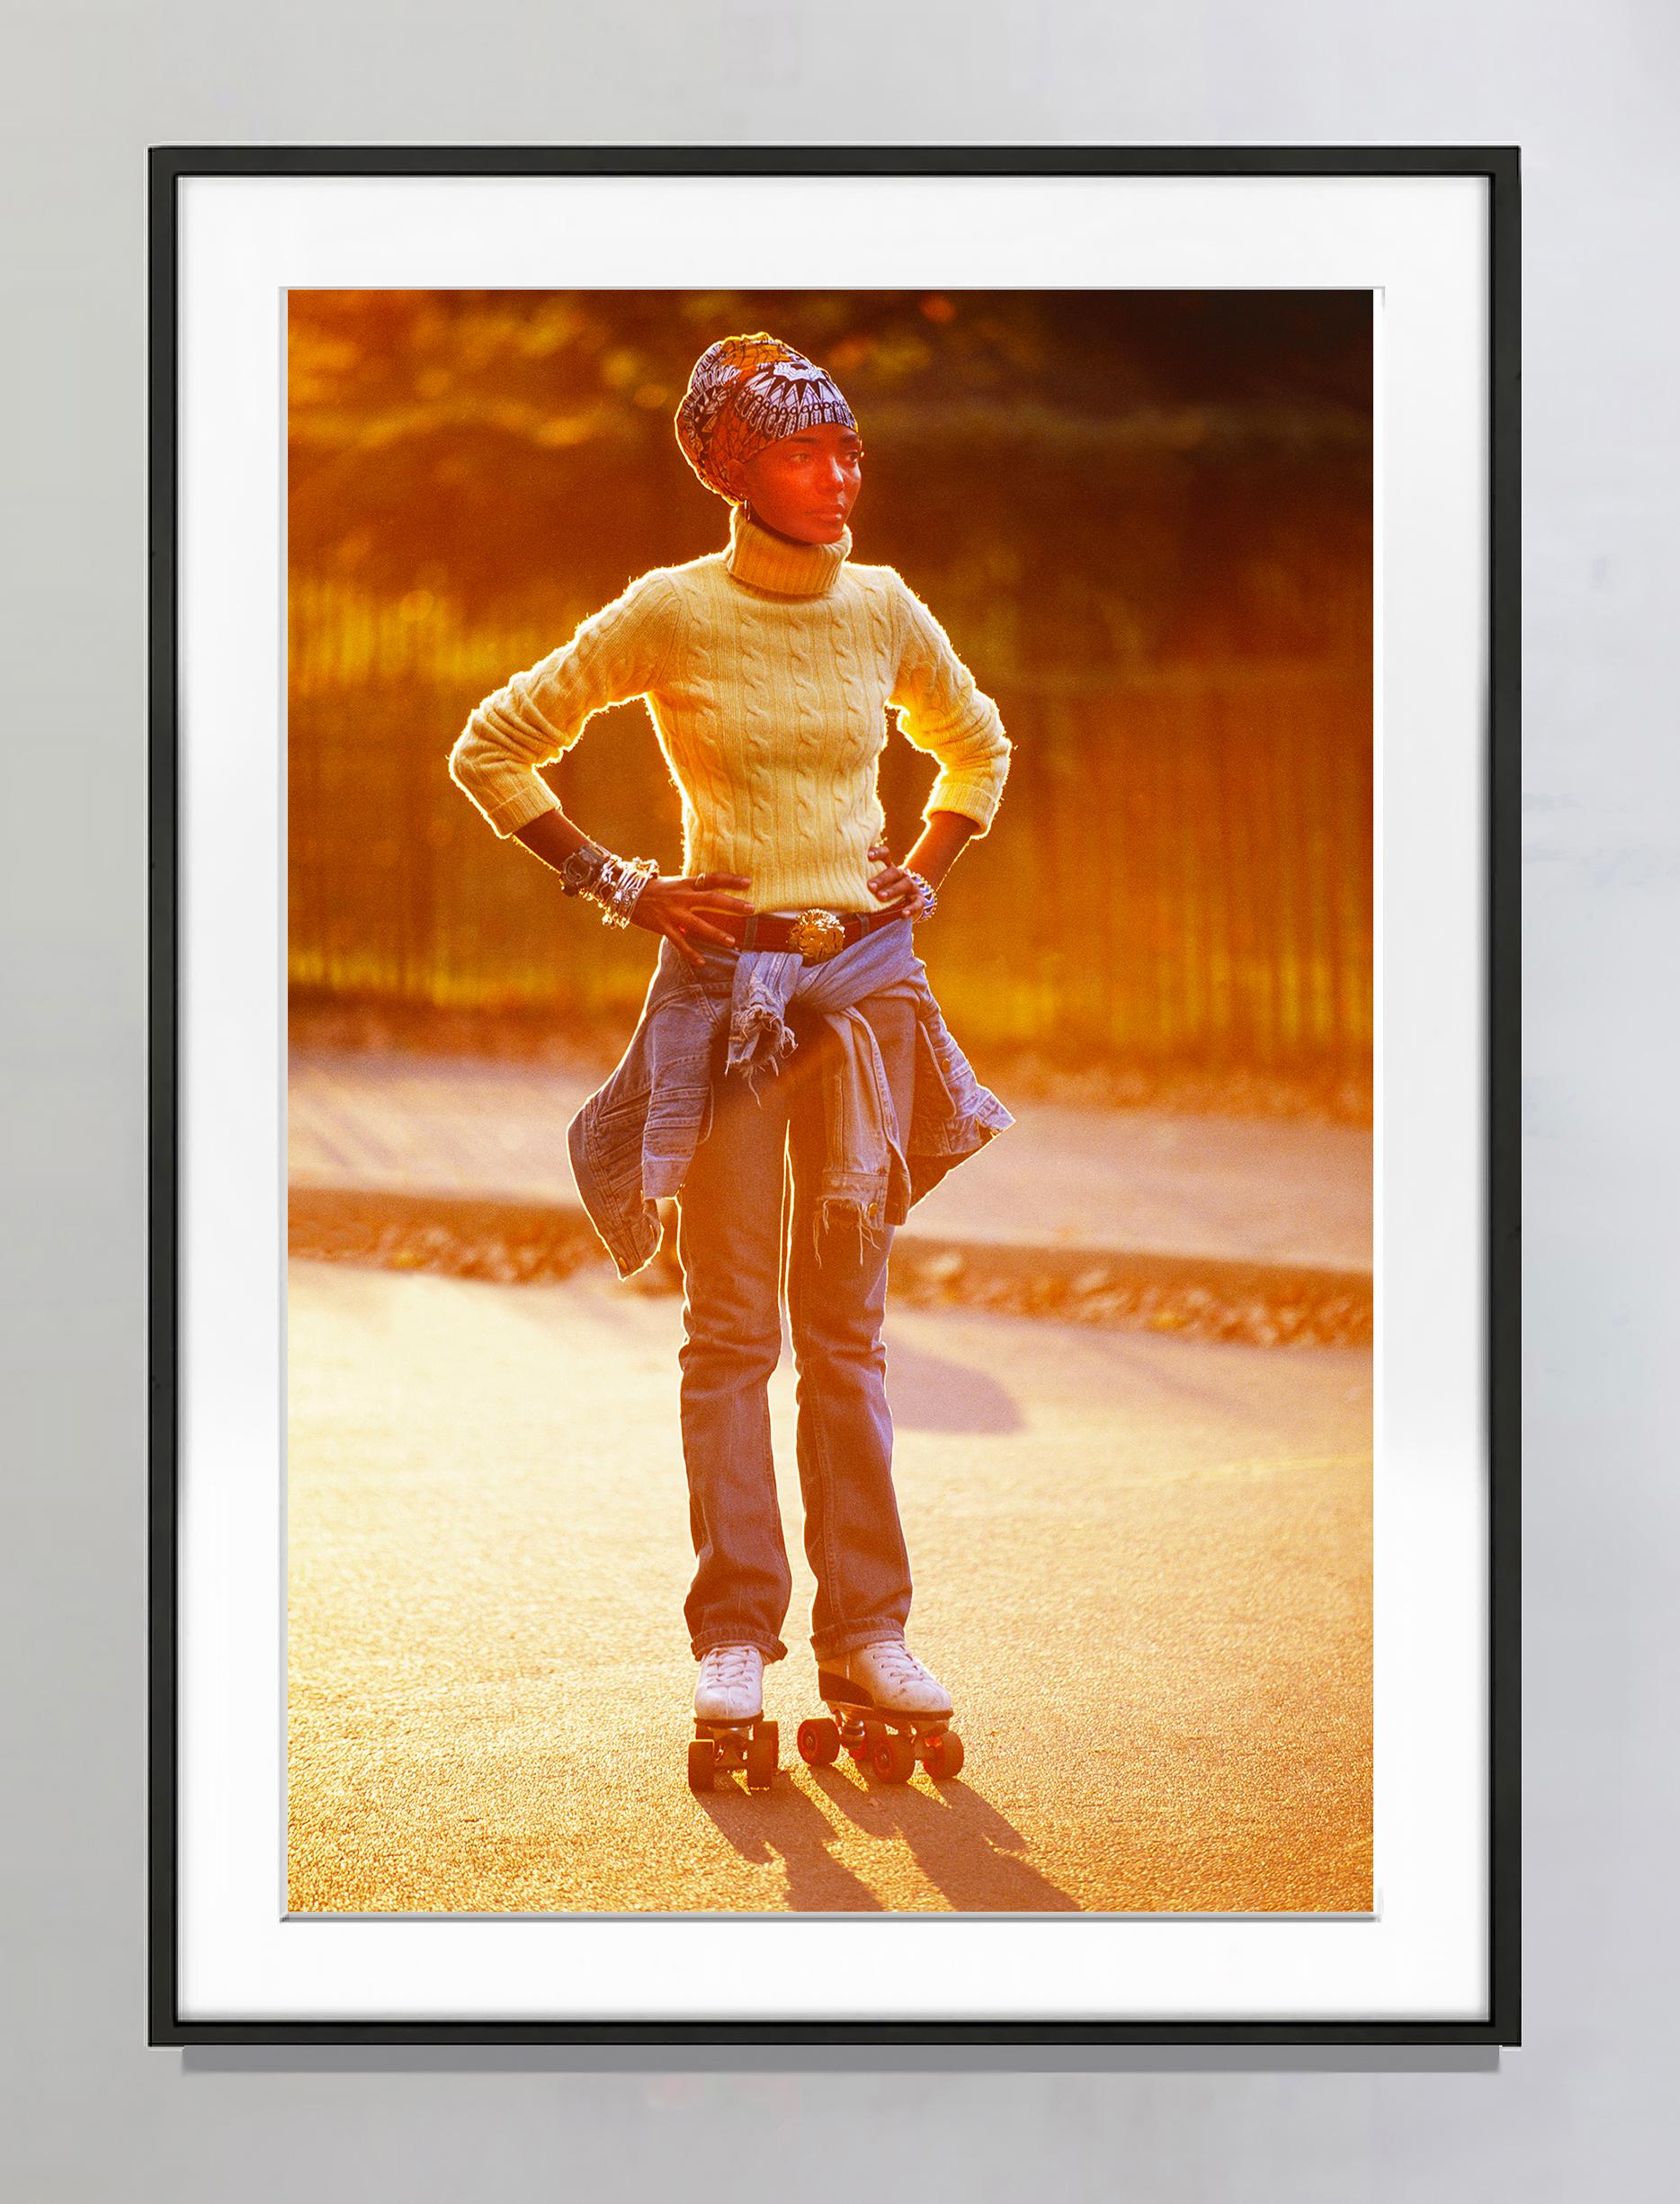 Hip Beautiful Black Female Roller Skates in Central Park Soaked in Golden Light  - Photograph by Mitchell Funk